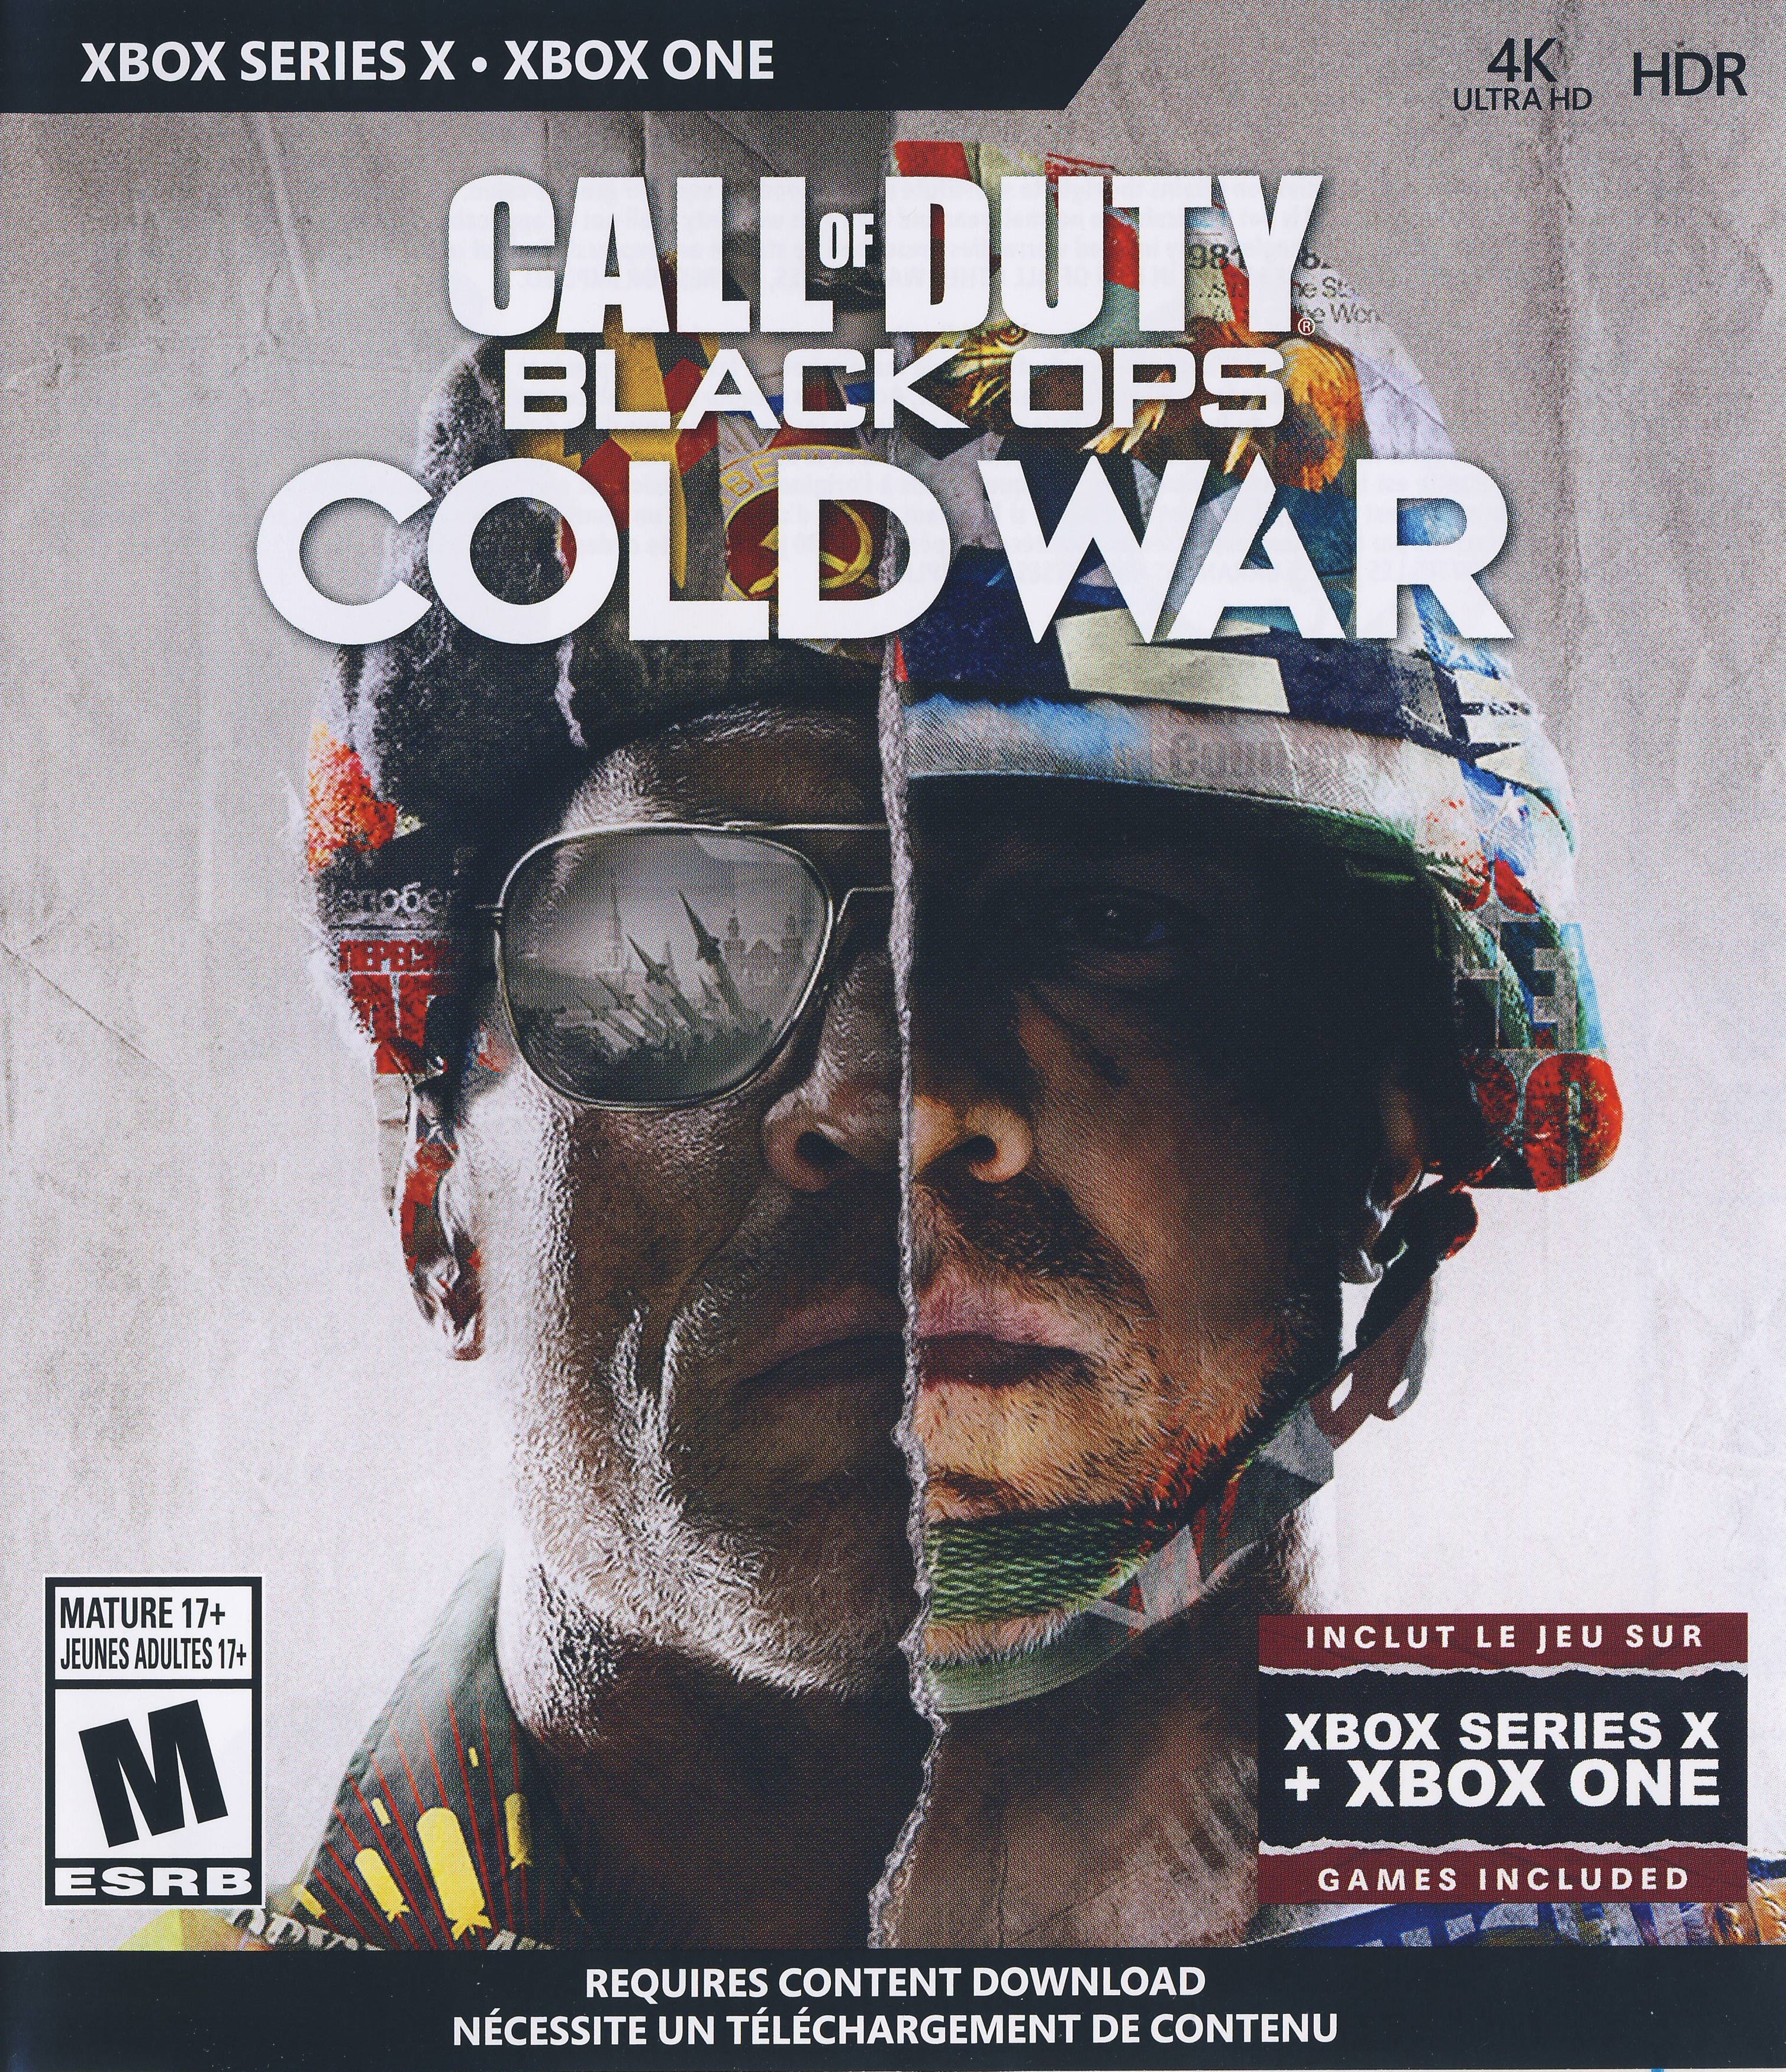 'Call of Duty: Black Ops - Cold War'